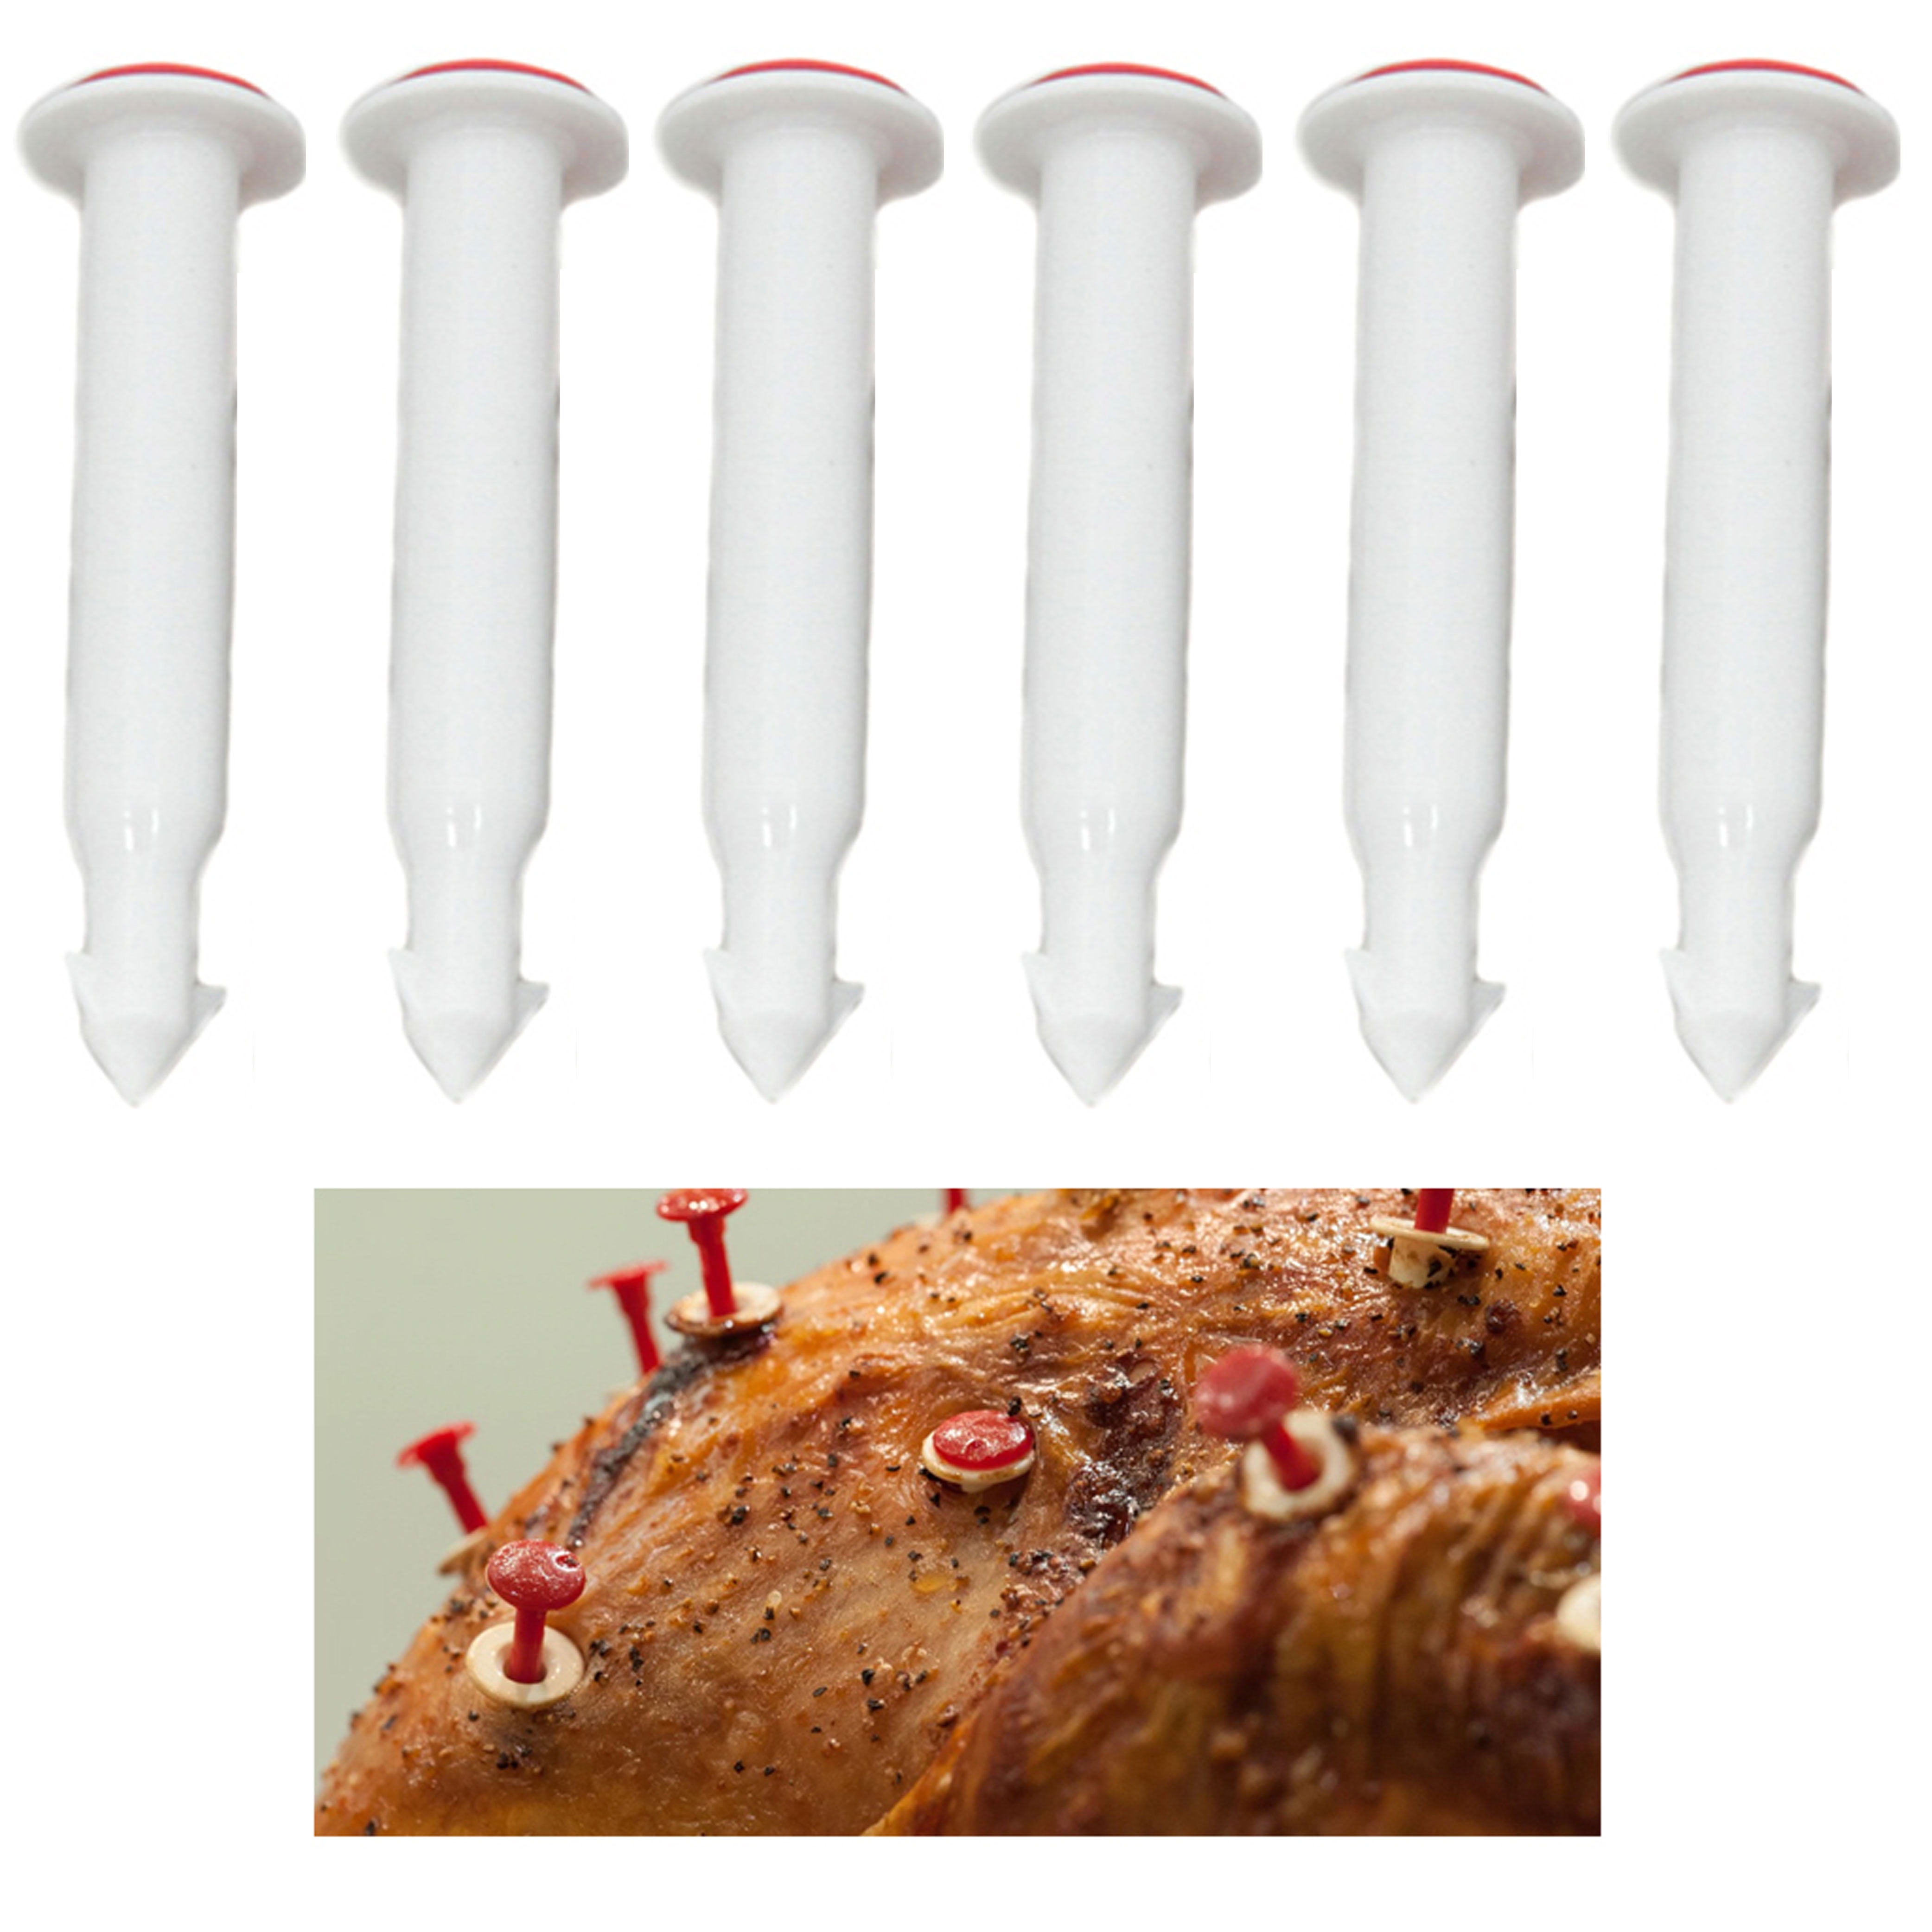 Turkey Pop Up Timer, 20Pcs Poultry Thermometer Pop Up Cooking Thermometer  Roasted Chicken Temperature Meter for Oven Cooking Poultry Turkey Chicken